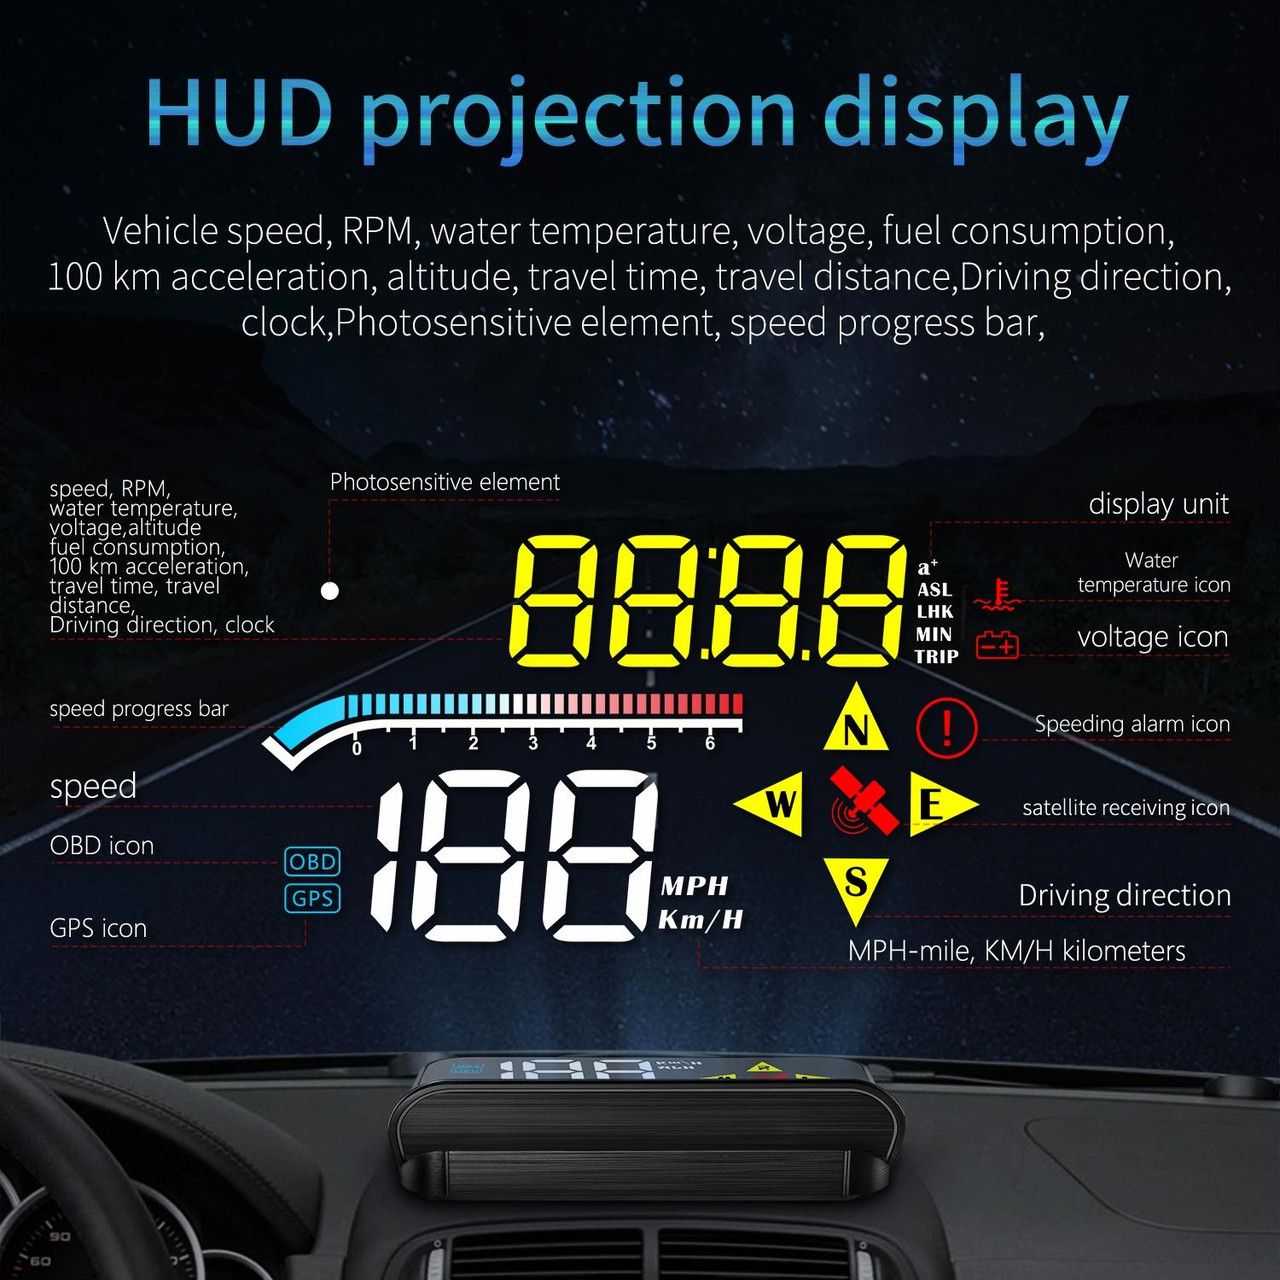 New A600 3.5 Inch Double Screen Smart Car OBD2 HUD GPS Head-Up Display  Speedometer Head-Up Display - Best Android Screen for Car